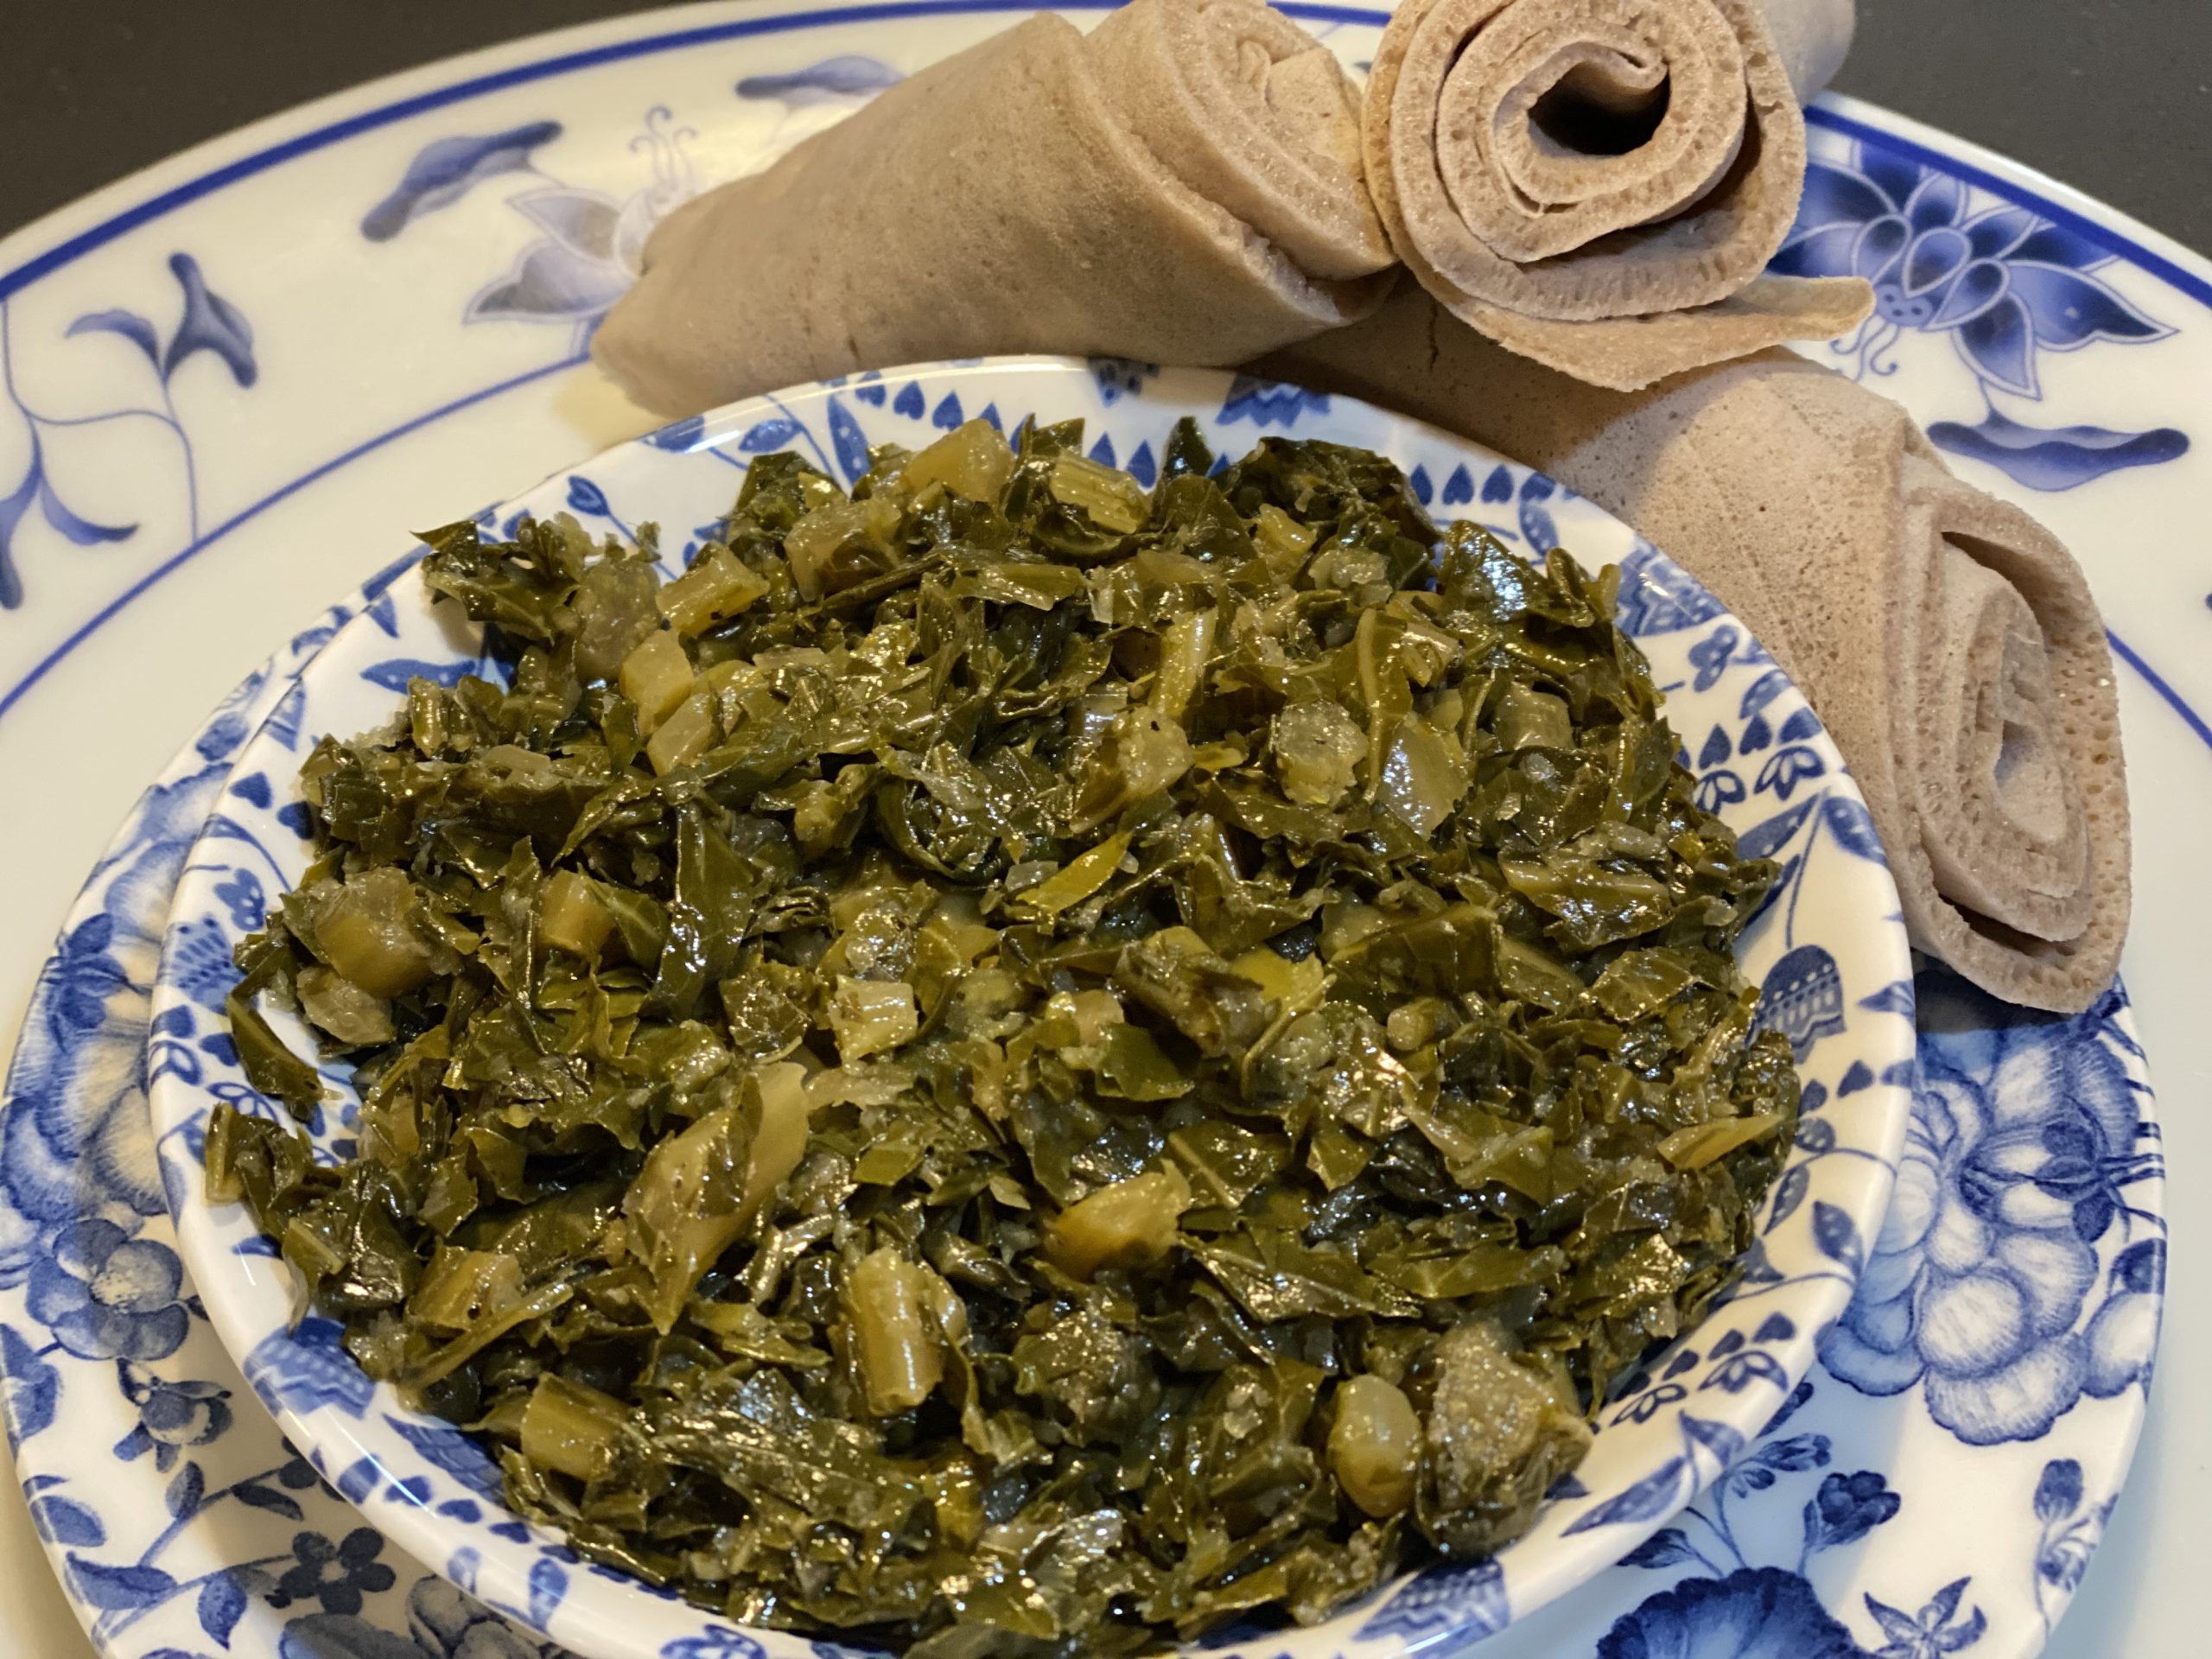 A blue and white floral bowl featuring sautéed collard greens on top of two white and blue floral plates, surrounded by three rolled up slices of injera (Ethiopian flatbread).